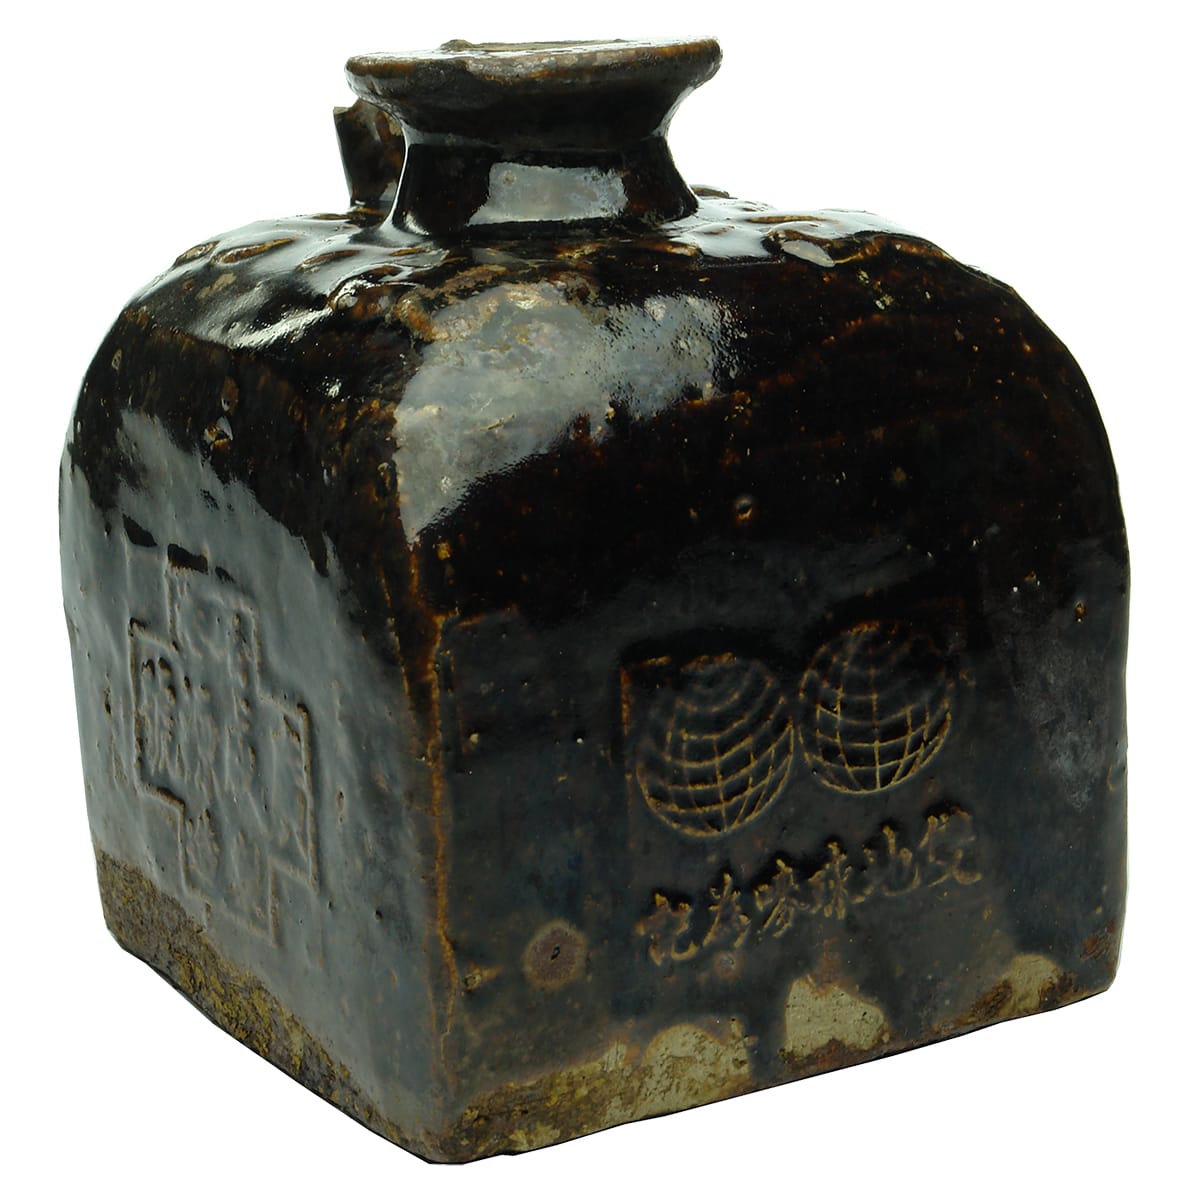 Chinese Soy Sauce. Square with moulded designs.